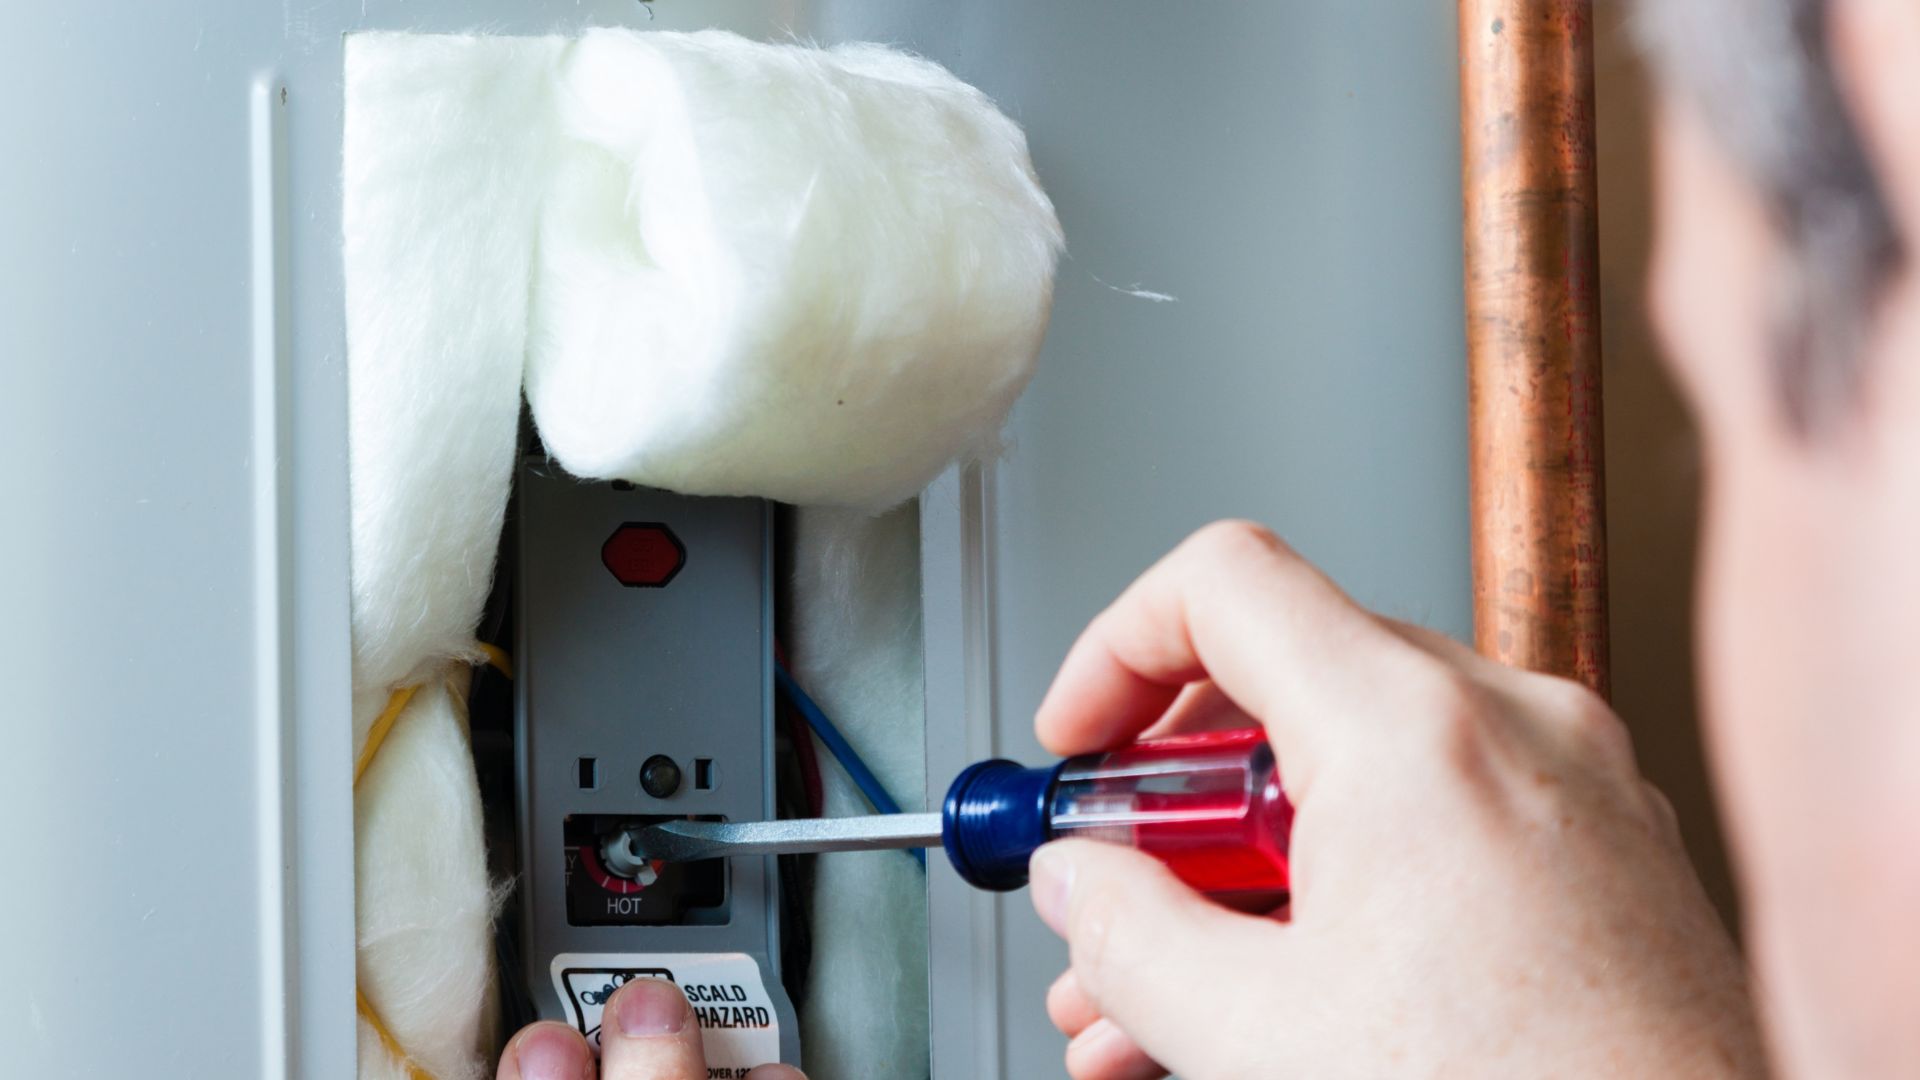 Benefits of Hiring a Licensed Plumber for Hot Water Heater Repairs